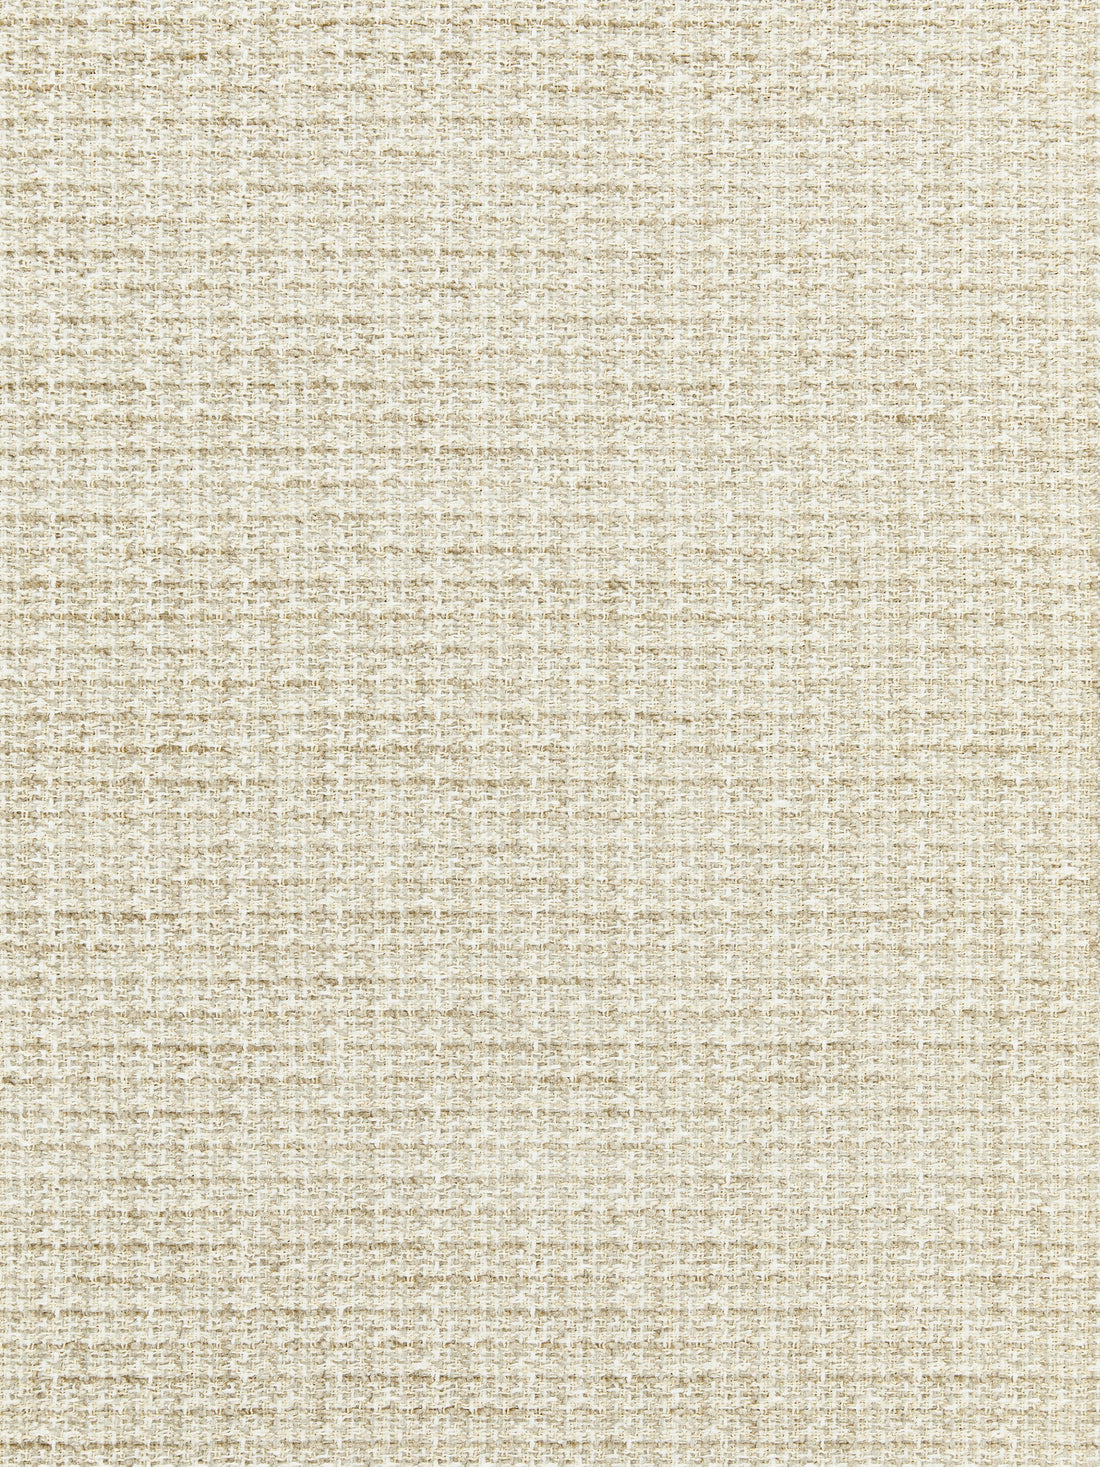 Highland Chenille fabric in oatmilk color - pattern number SC 000127257 - by Scalamandre in the Scalamandre Fabrics Book 1 collection